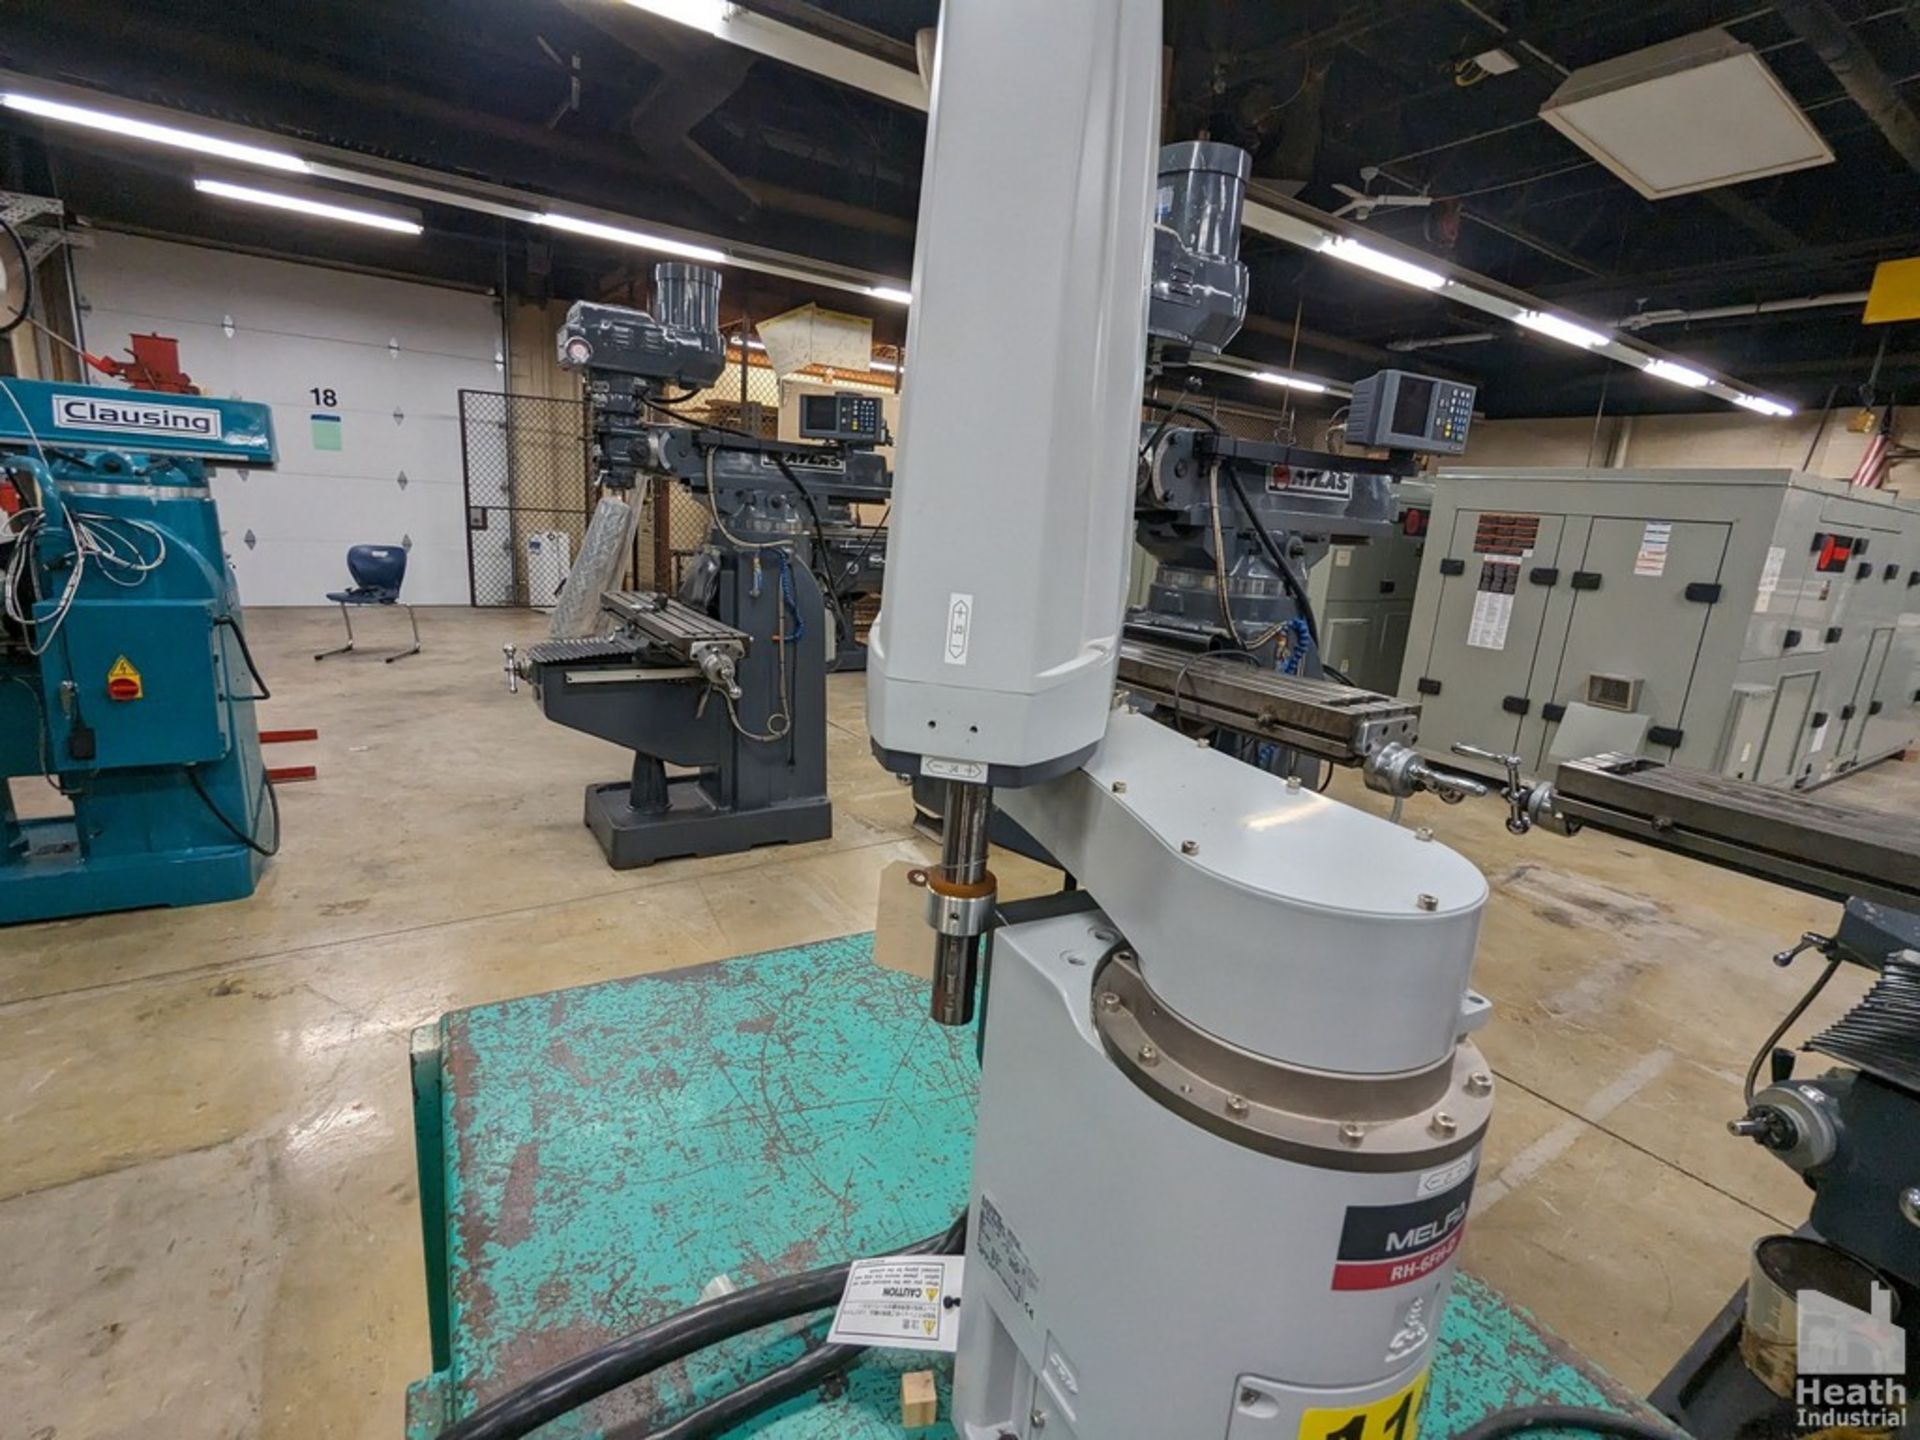 MITSUBISHI 4-AXIS MODEL RH-6FH-D MELFA CNC INDUSTRIAL ROBOT, S/N FB3060115W/6W (NEW 2013) WITH - Image 3 of 6